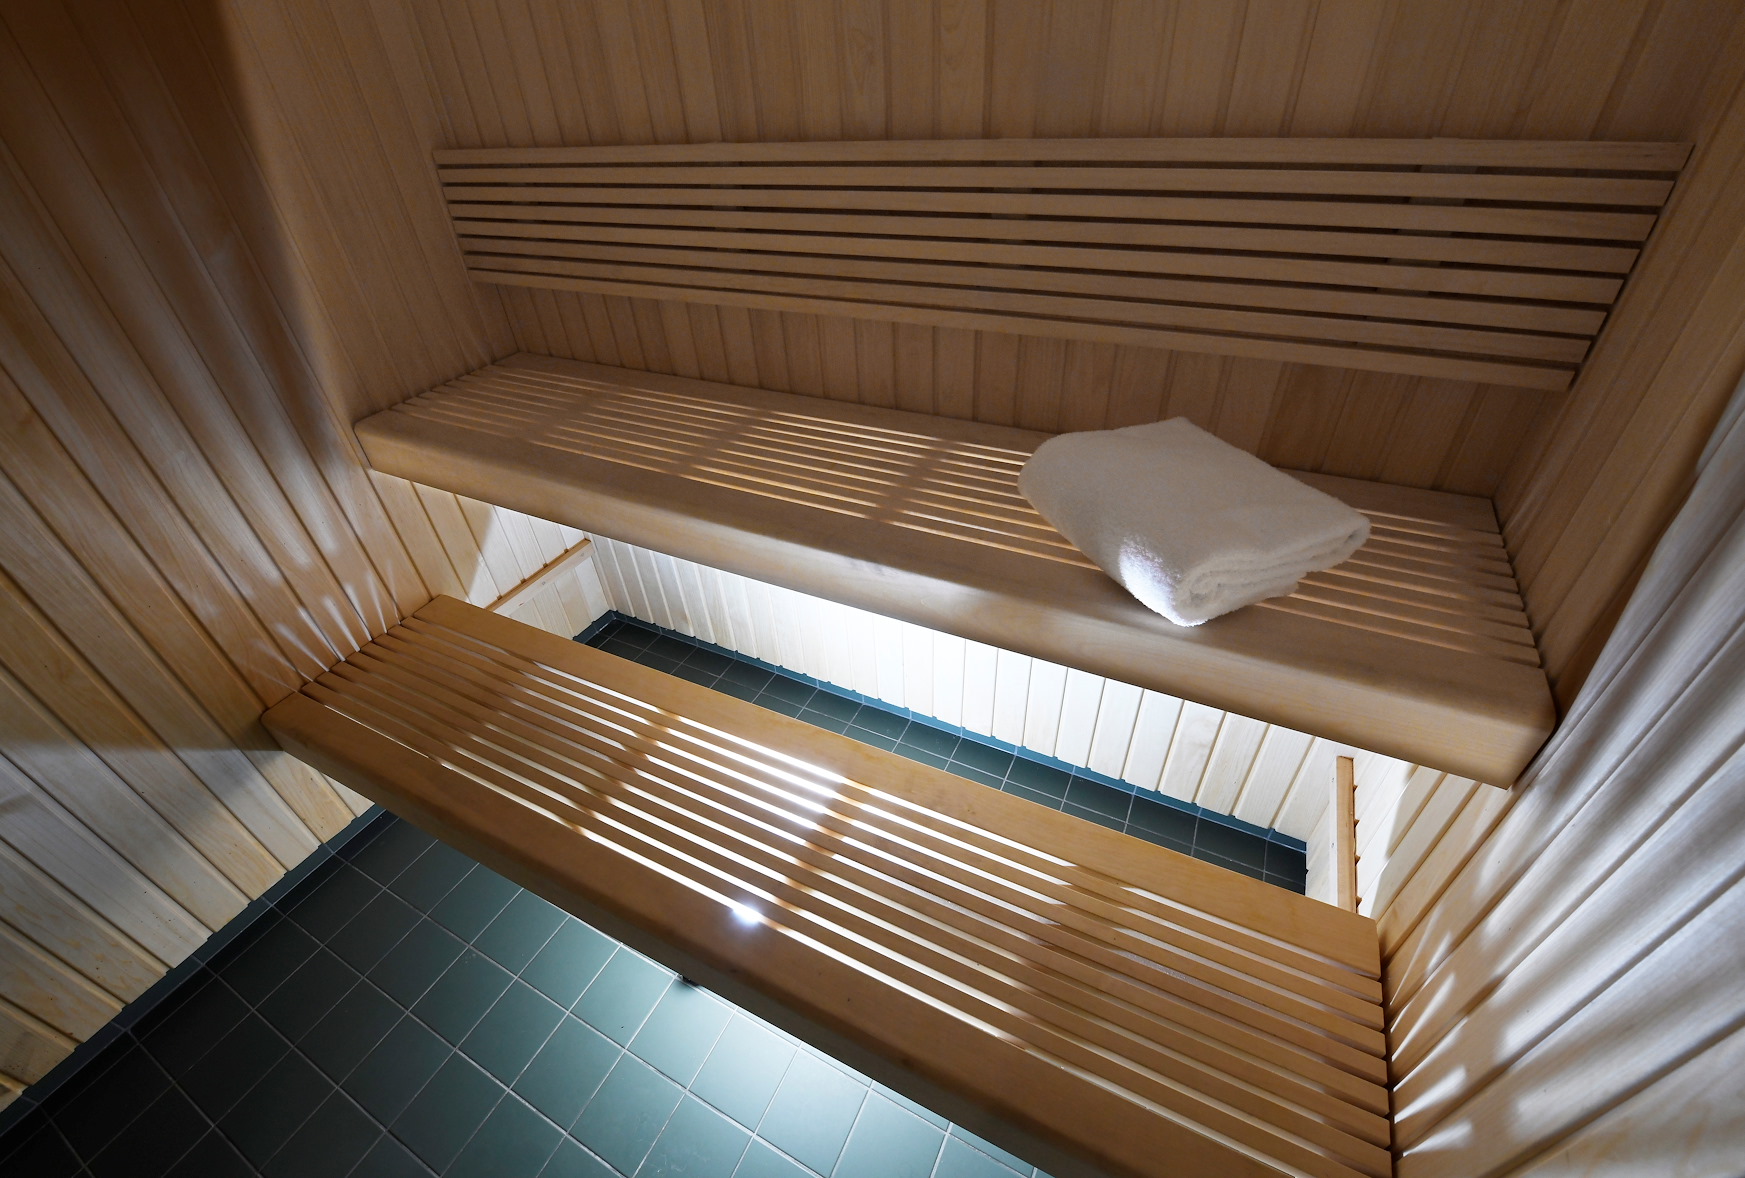 30 Minute Are Saunas Open In California Gyms for Women